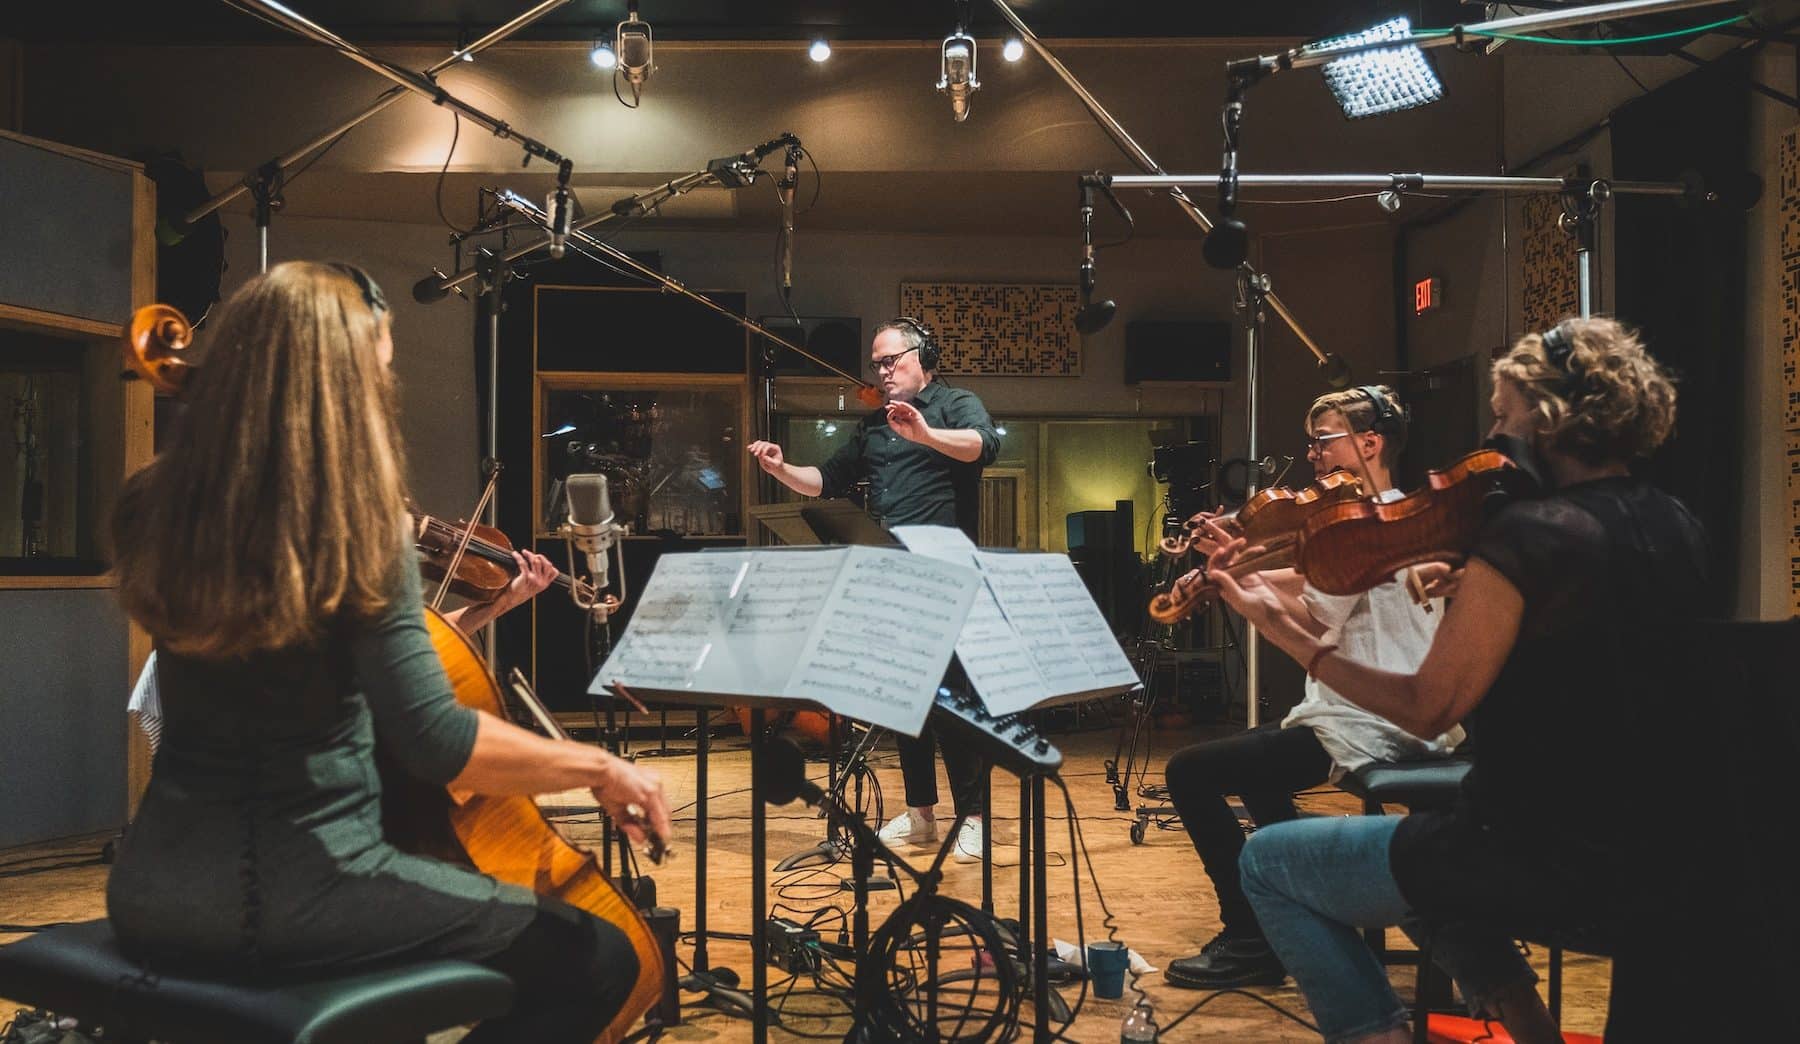 A record session for Synthesis: The String Quartet Project, with Ryan Truesdell Conducting; photo by Leo Mascaro